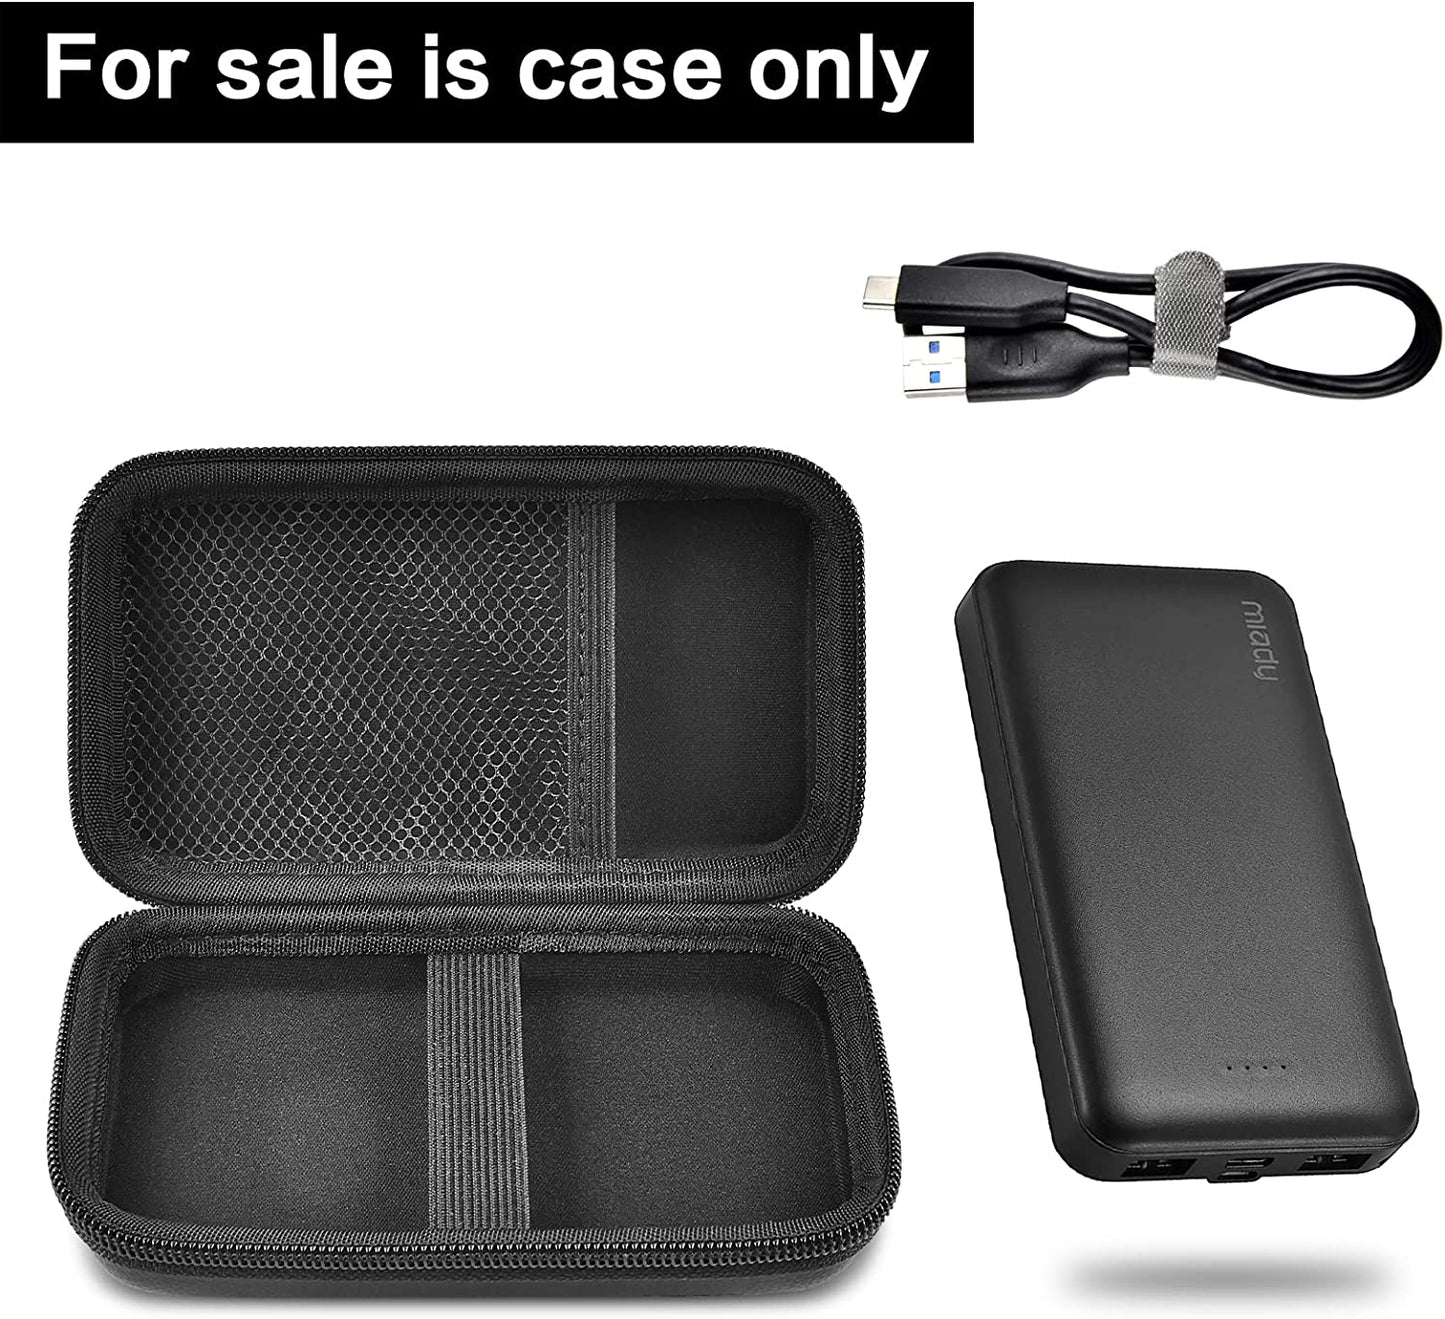 Case Compatible with Miady 10000mAh Dual USB Portable Charger, Fast Charging Power Bank Travel Carrying Organizer, Backup Charger Pouch Storage Bag for USB C Input Cable Cord (Box Only)